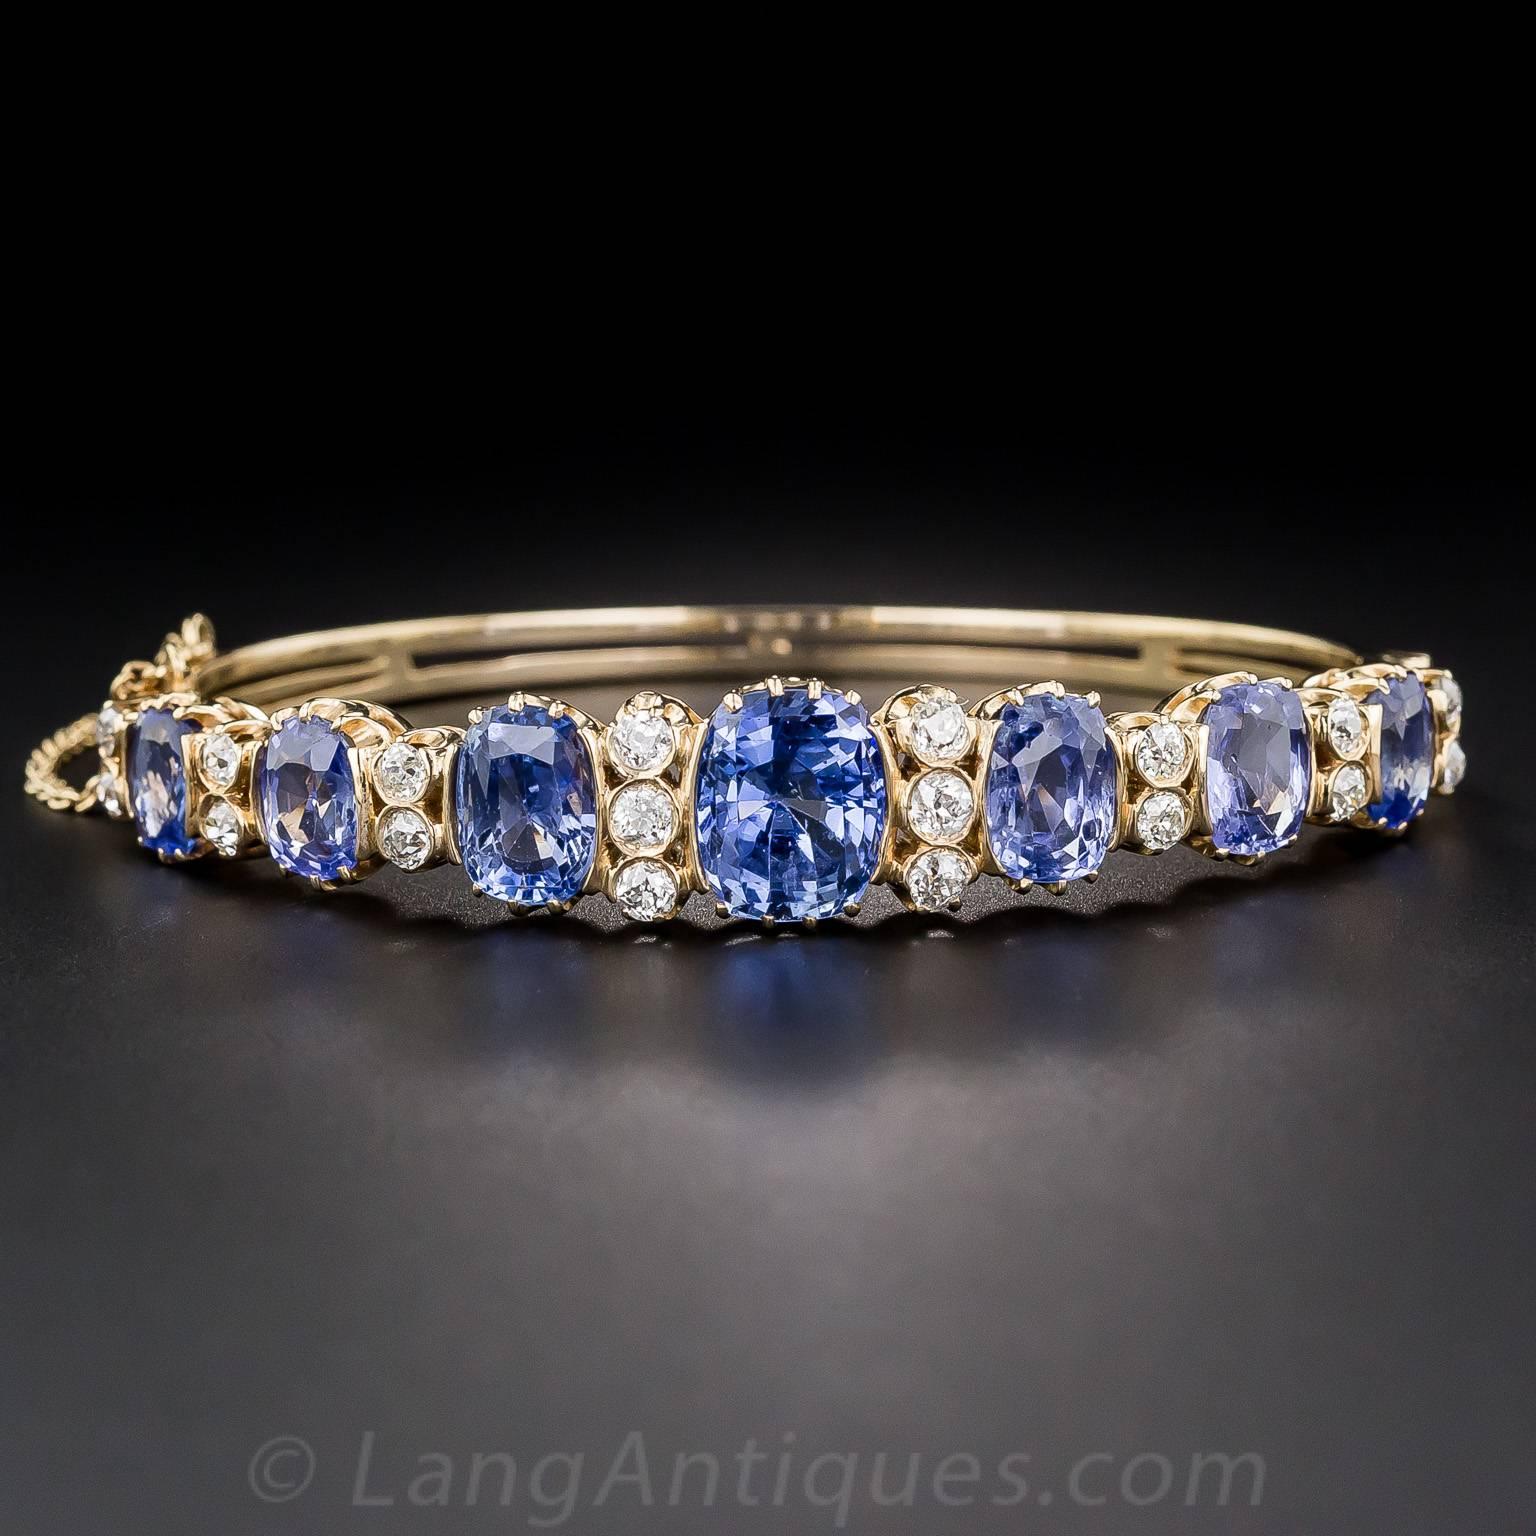 Wrap your wrist with lucky seven beautiful, bright and shining, cornflower blue sapphires (all natural, no-heat, Ceylon origin) in this seriously stunning and impressive bangle bracelet, handcrafted in 15K yellow gold (hence very likely of British